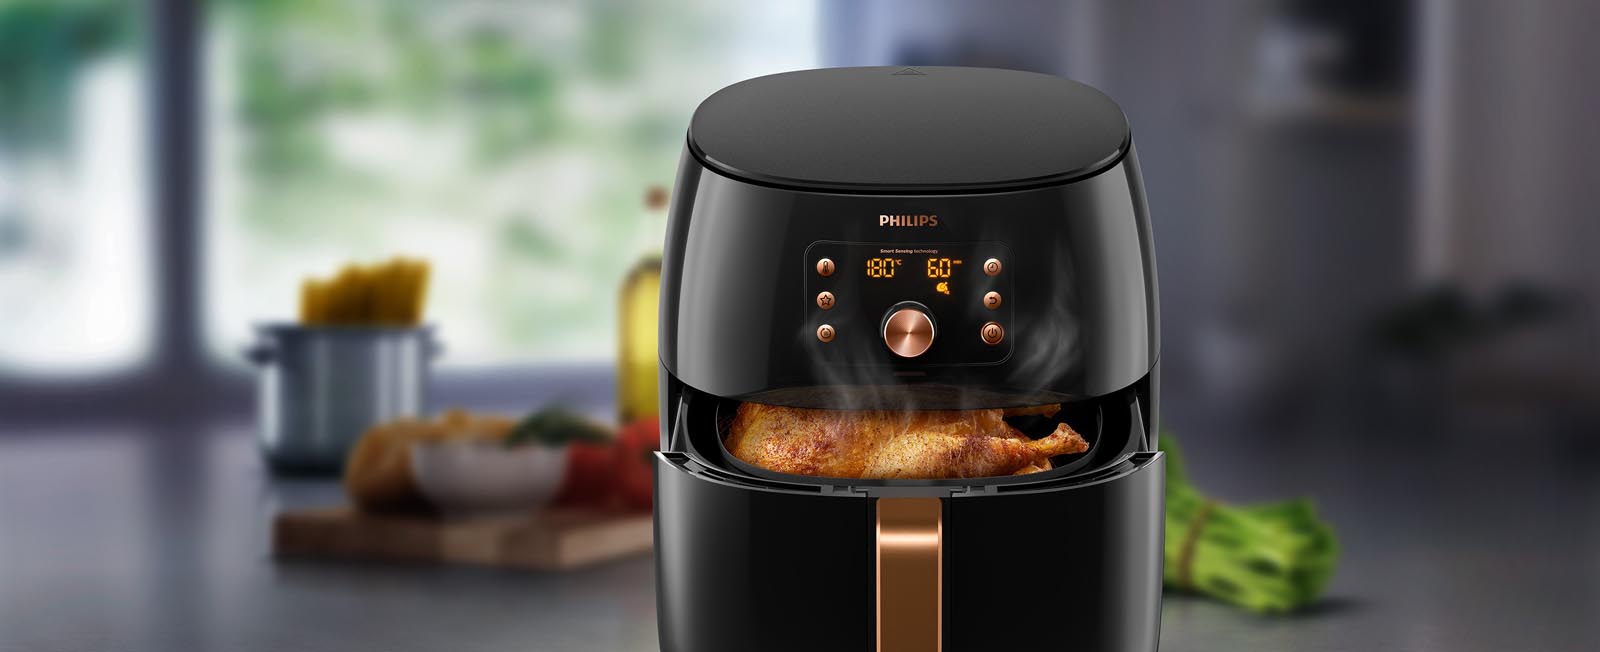 Philips Smart XXL Airfryer Review + 10 Easy Airfryer Recipes | Harvey Norman Australia